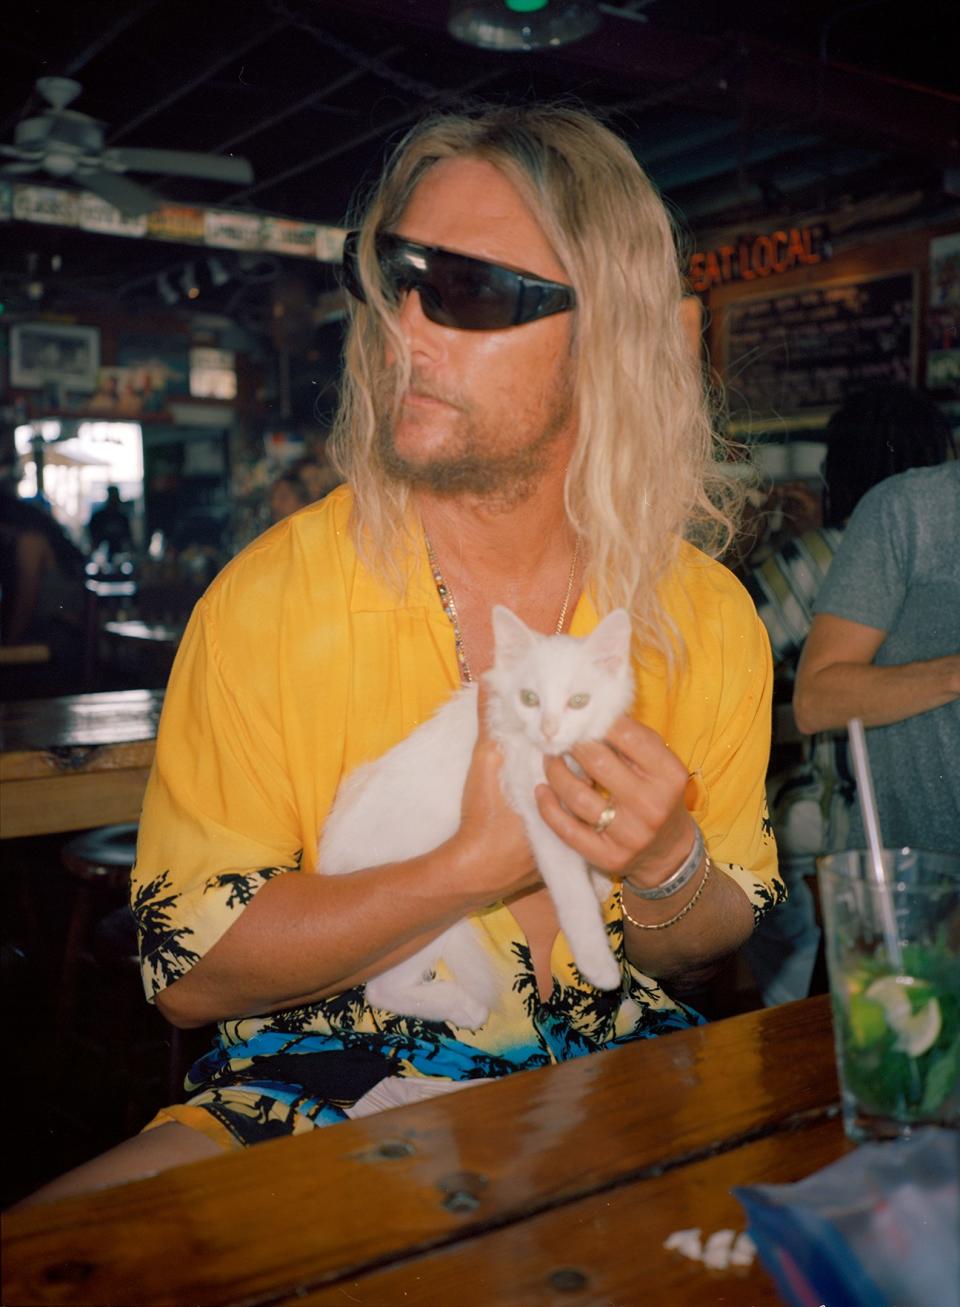 “The kitten is one of our early introductions to Moondog, the protagonist in the movie. He just happens upon this perfect white kitten, in a drunken, raw, on the dock—he's just like, stumbling drunk. He comes across this kitten, and it becomes his kind of, like, sidekick in the first segment of the film. You look at this dude, and he seems kind of like a wild street drunk, but then he has this kitten and you realize he's kind of, like, an amazing, innocent soul, you know?”